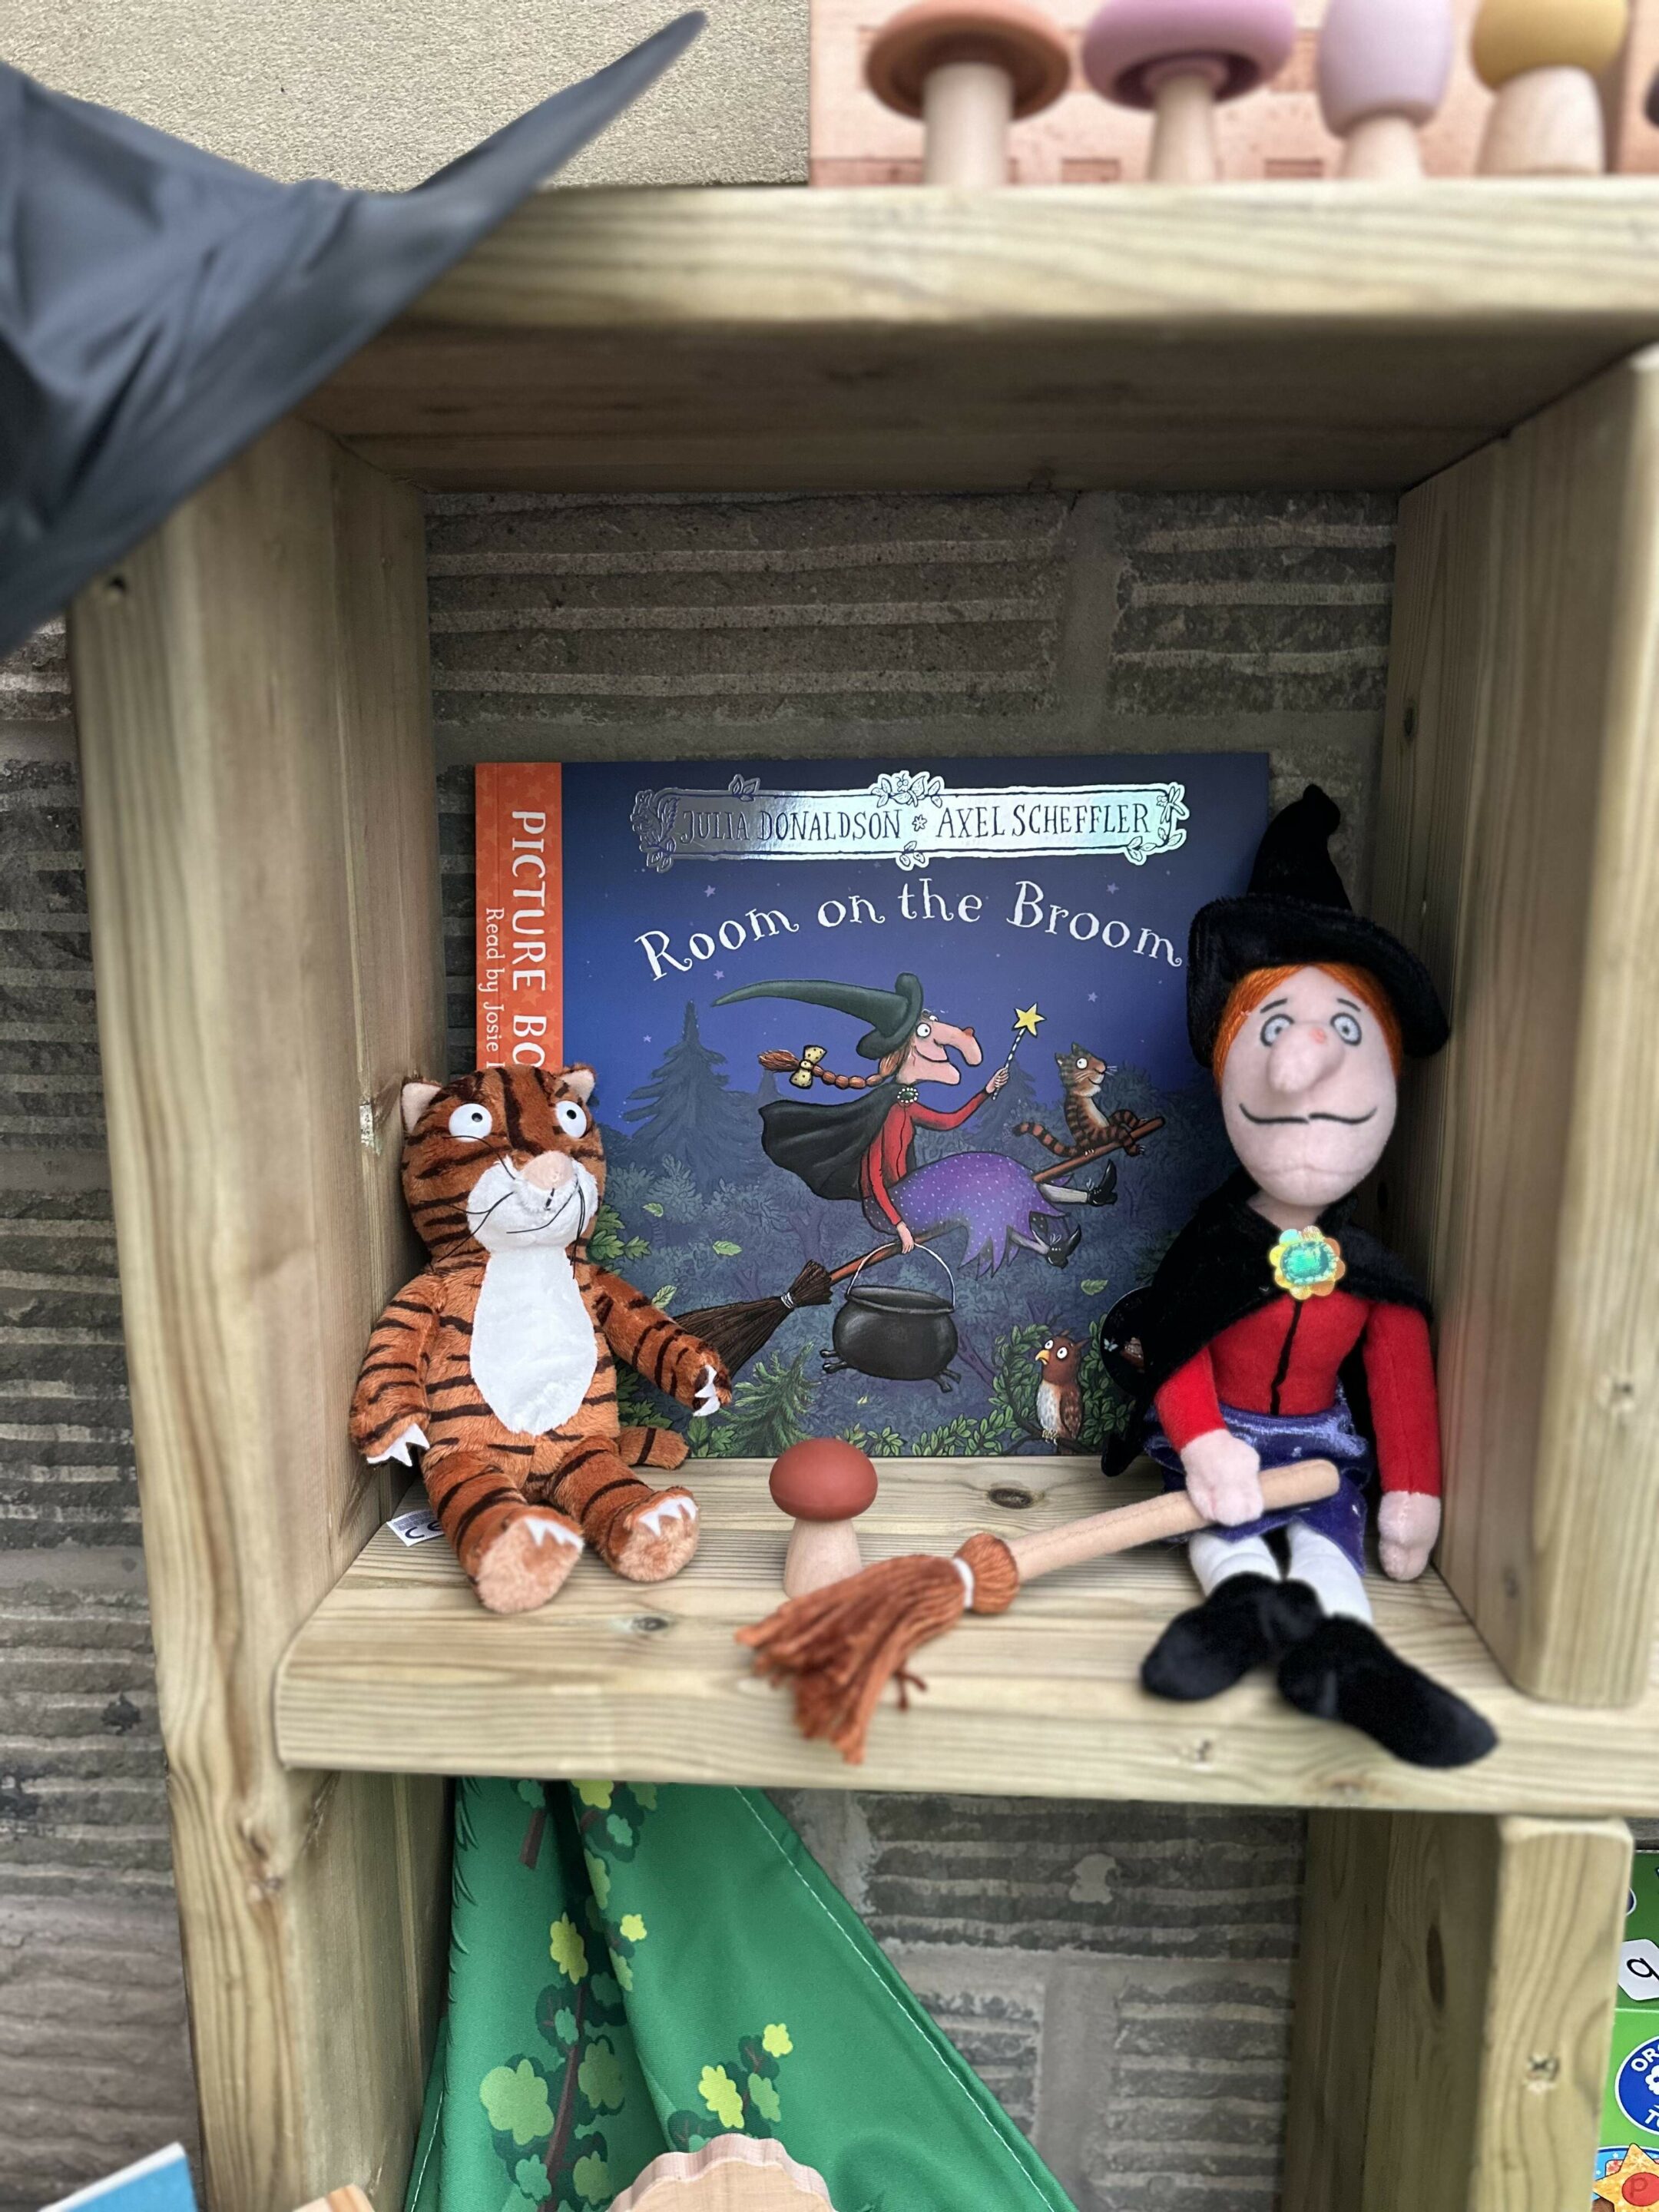 Room on the Broom resources